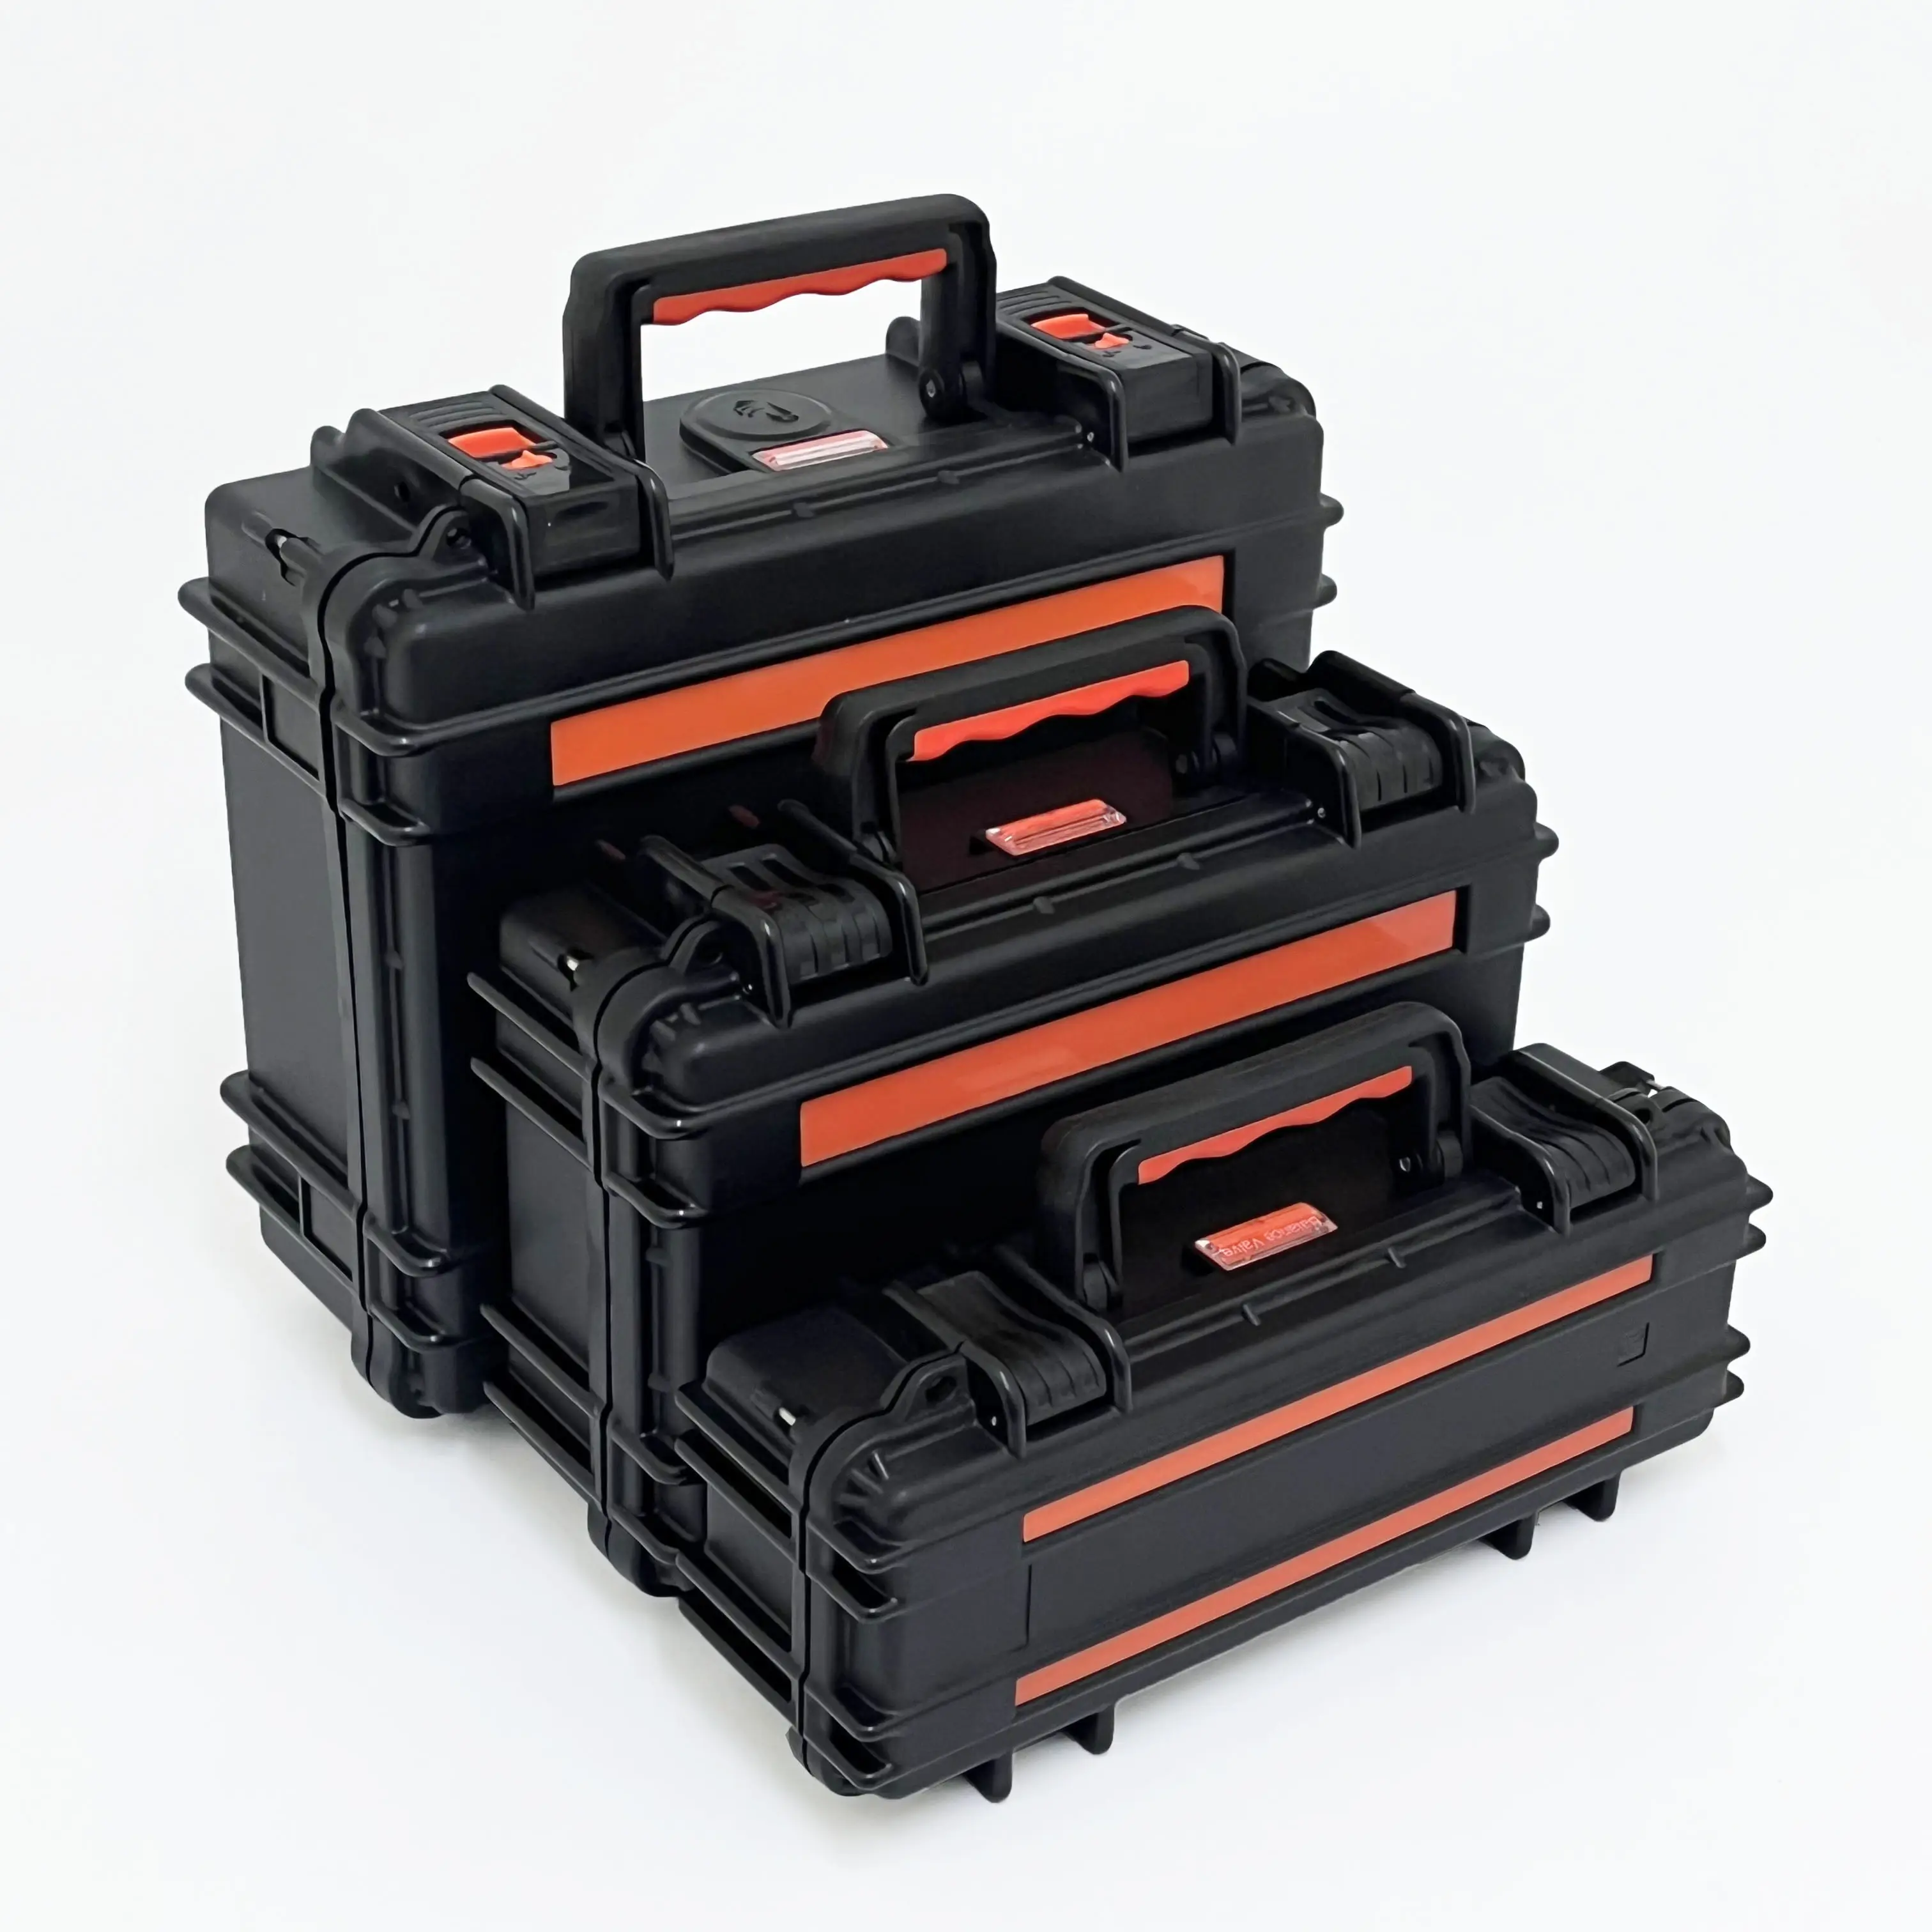 Hard Carrying Case Comprehensive Protection Plastic Reloading Waterproof Equipment Storage Case For Electronic